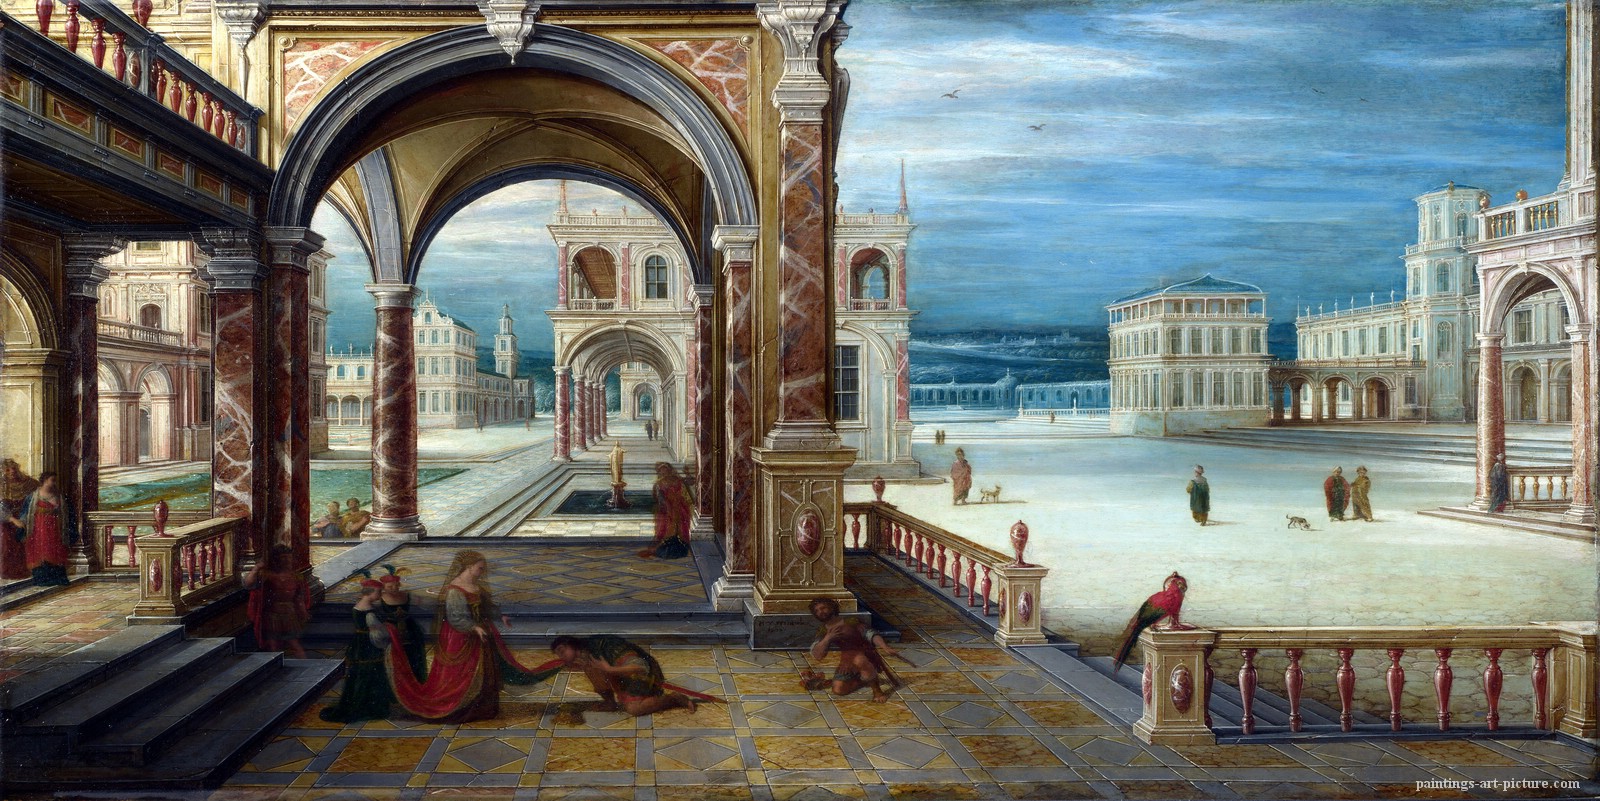 The Courtyard Of A Renaissance Palace Painting Paintings Art Picture